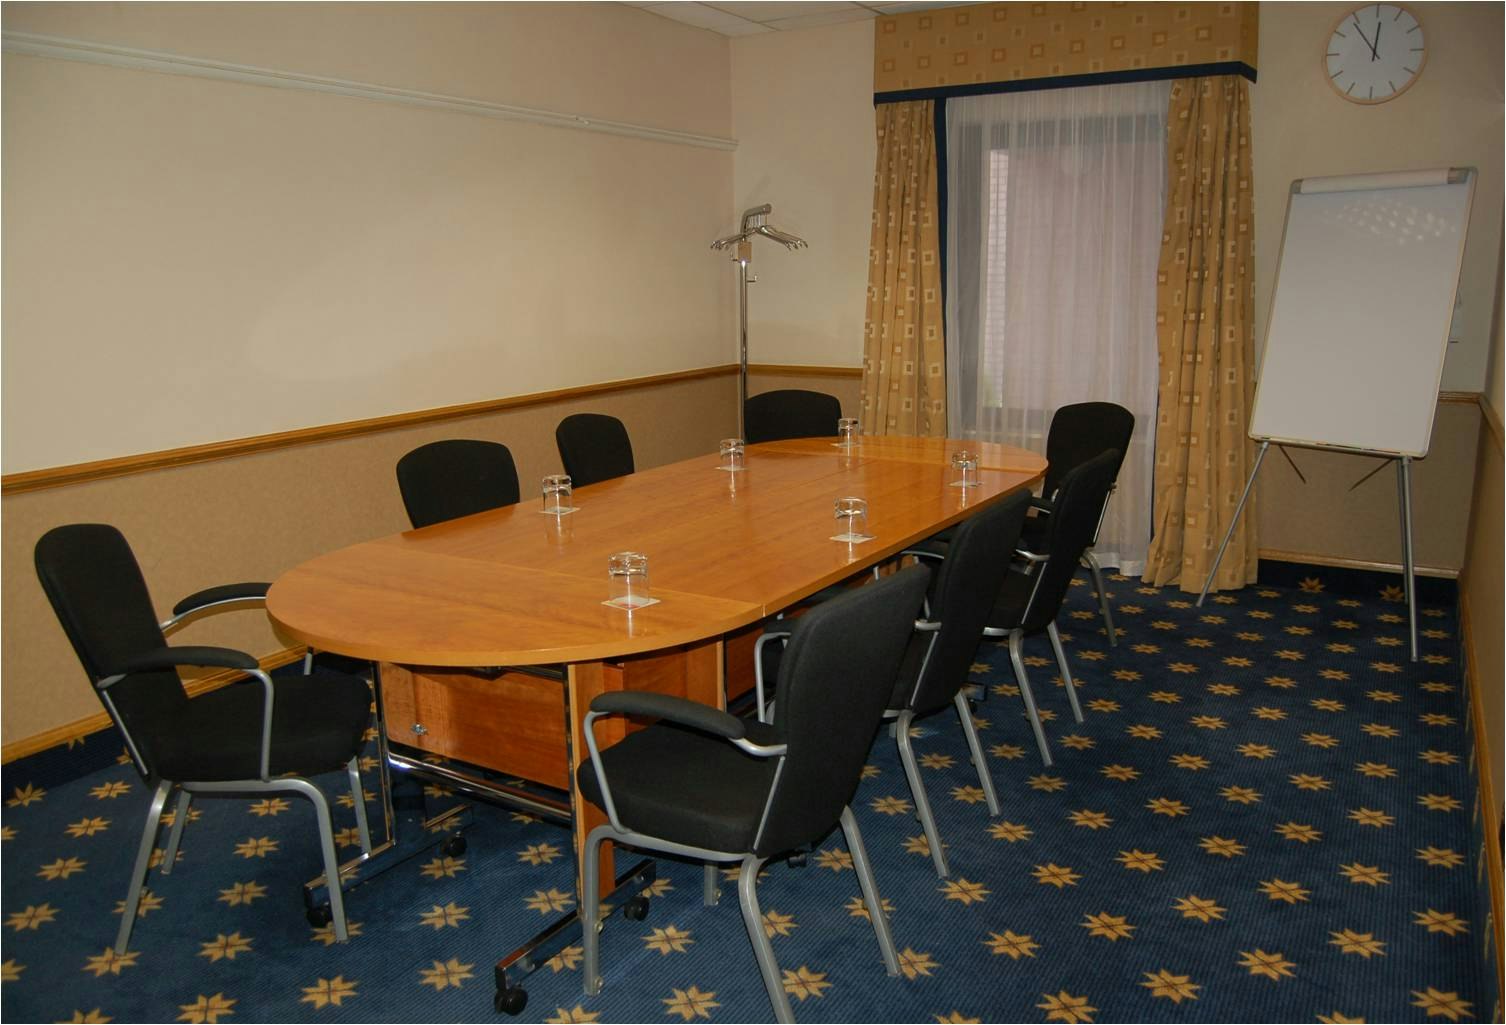 Hilton, Manchester Airport - Dulles Room image 1